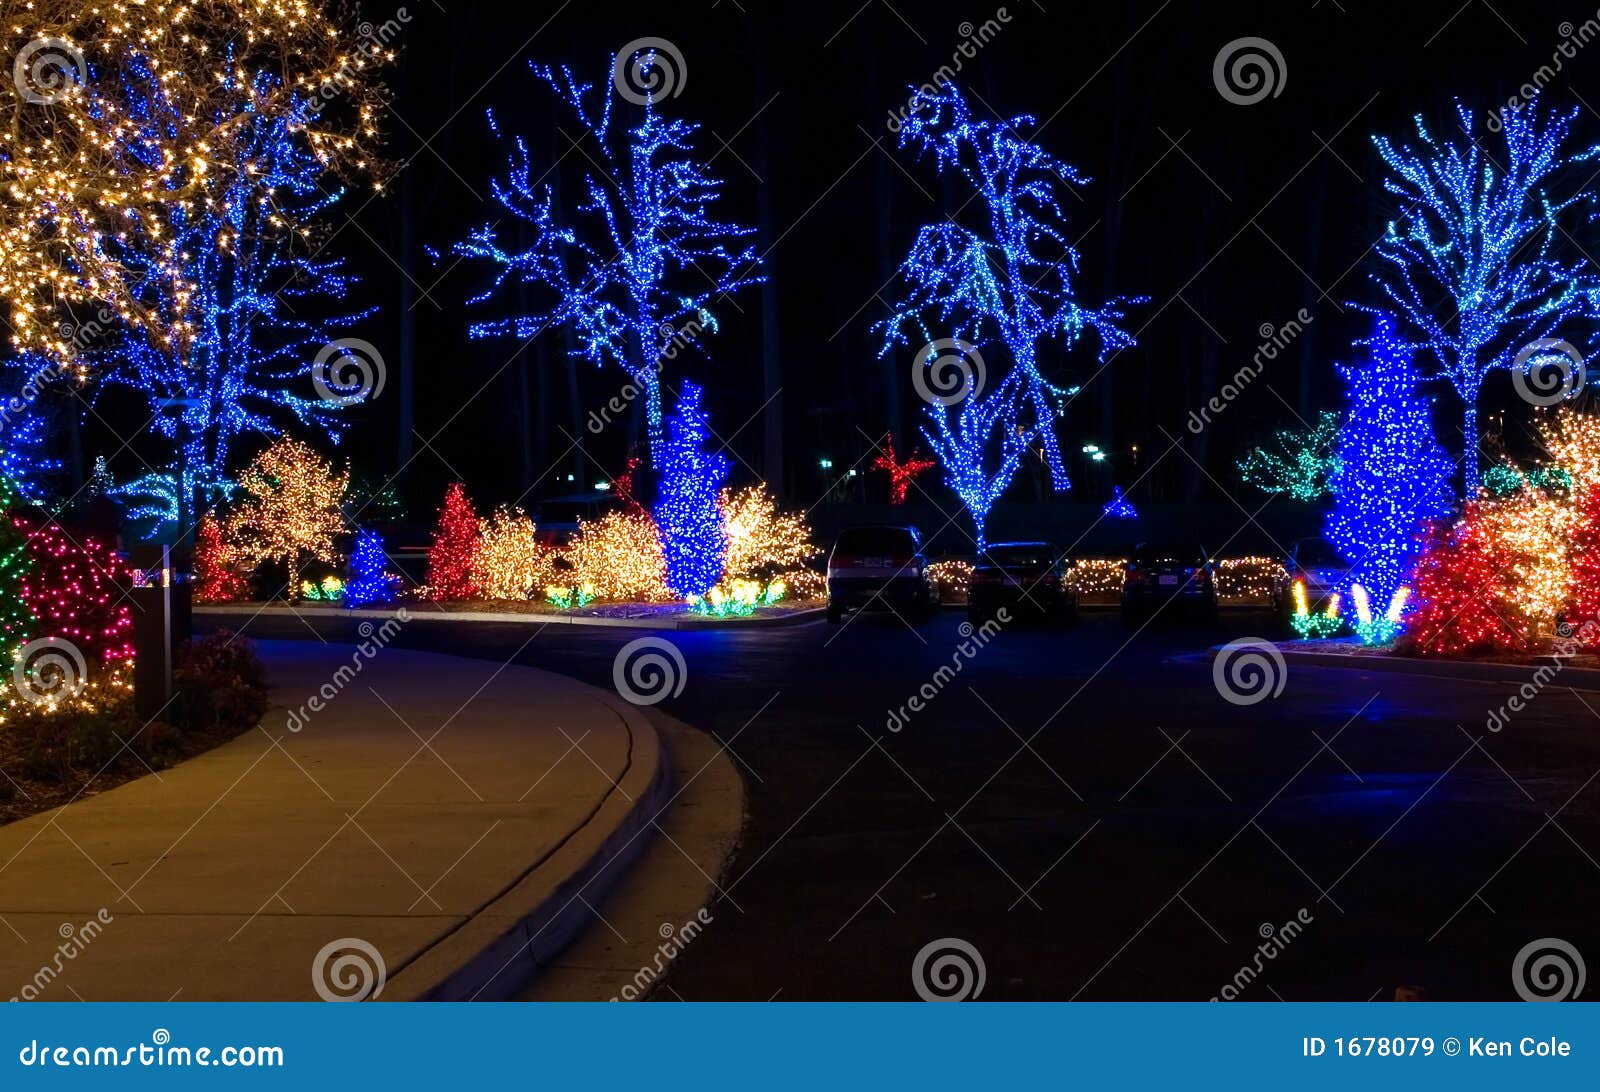 8+ Hundred Christmas Light Plug Royalty-Free Images, Stock Photos &  Pictures